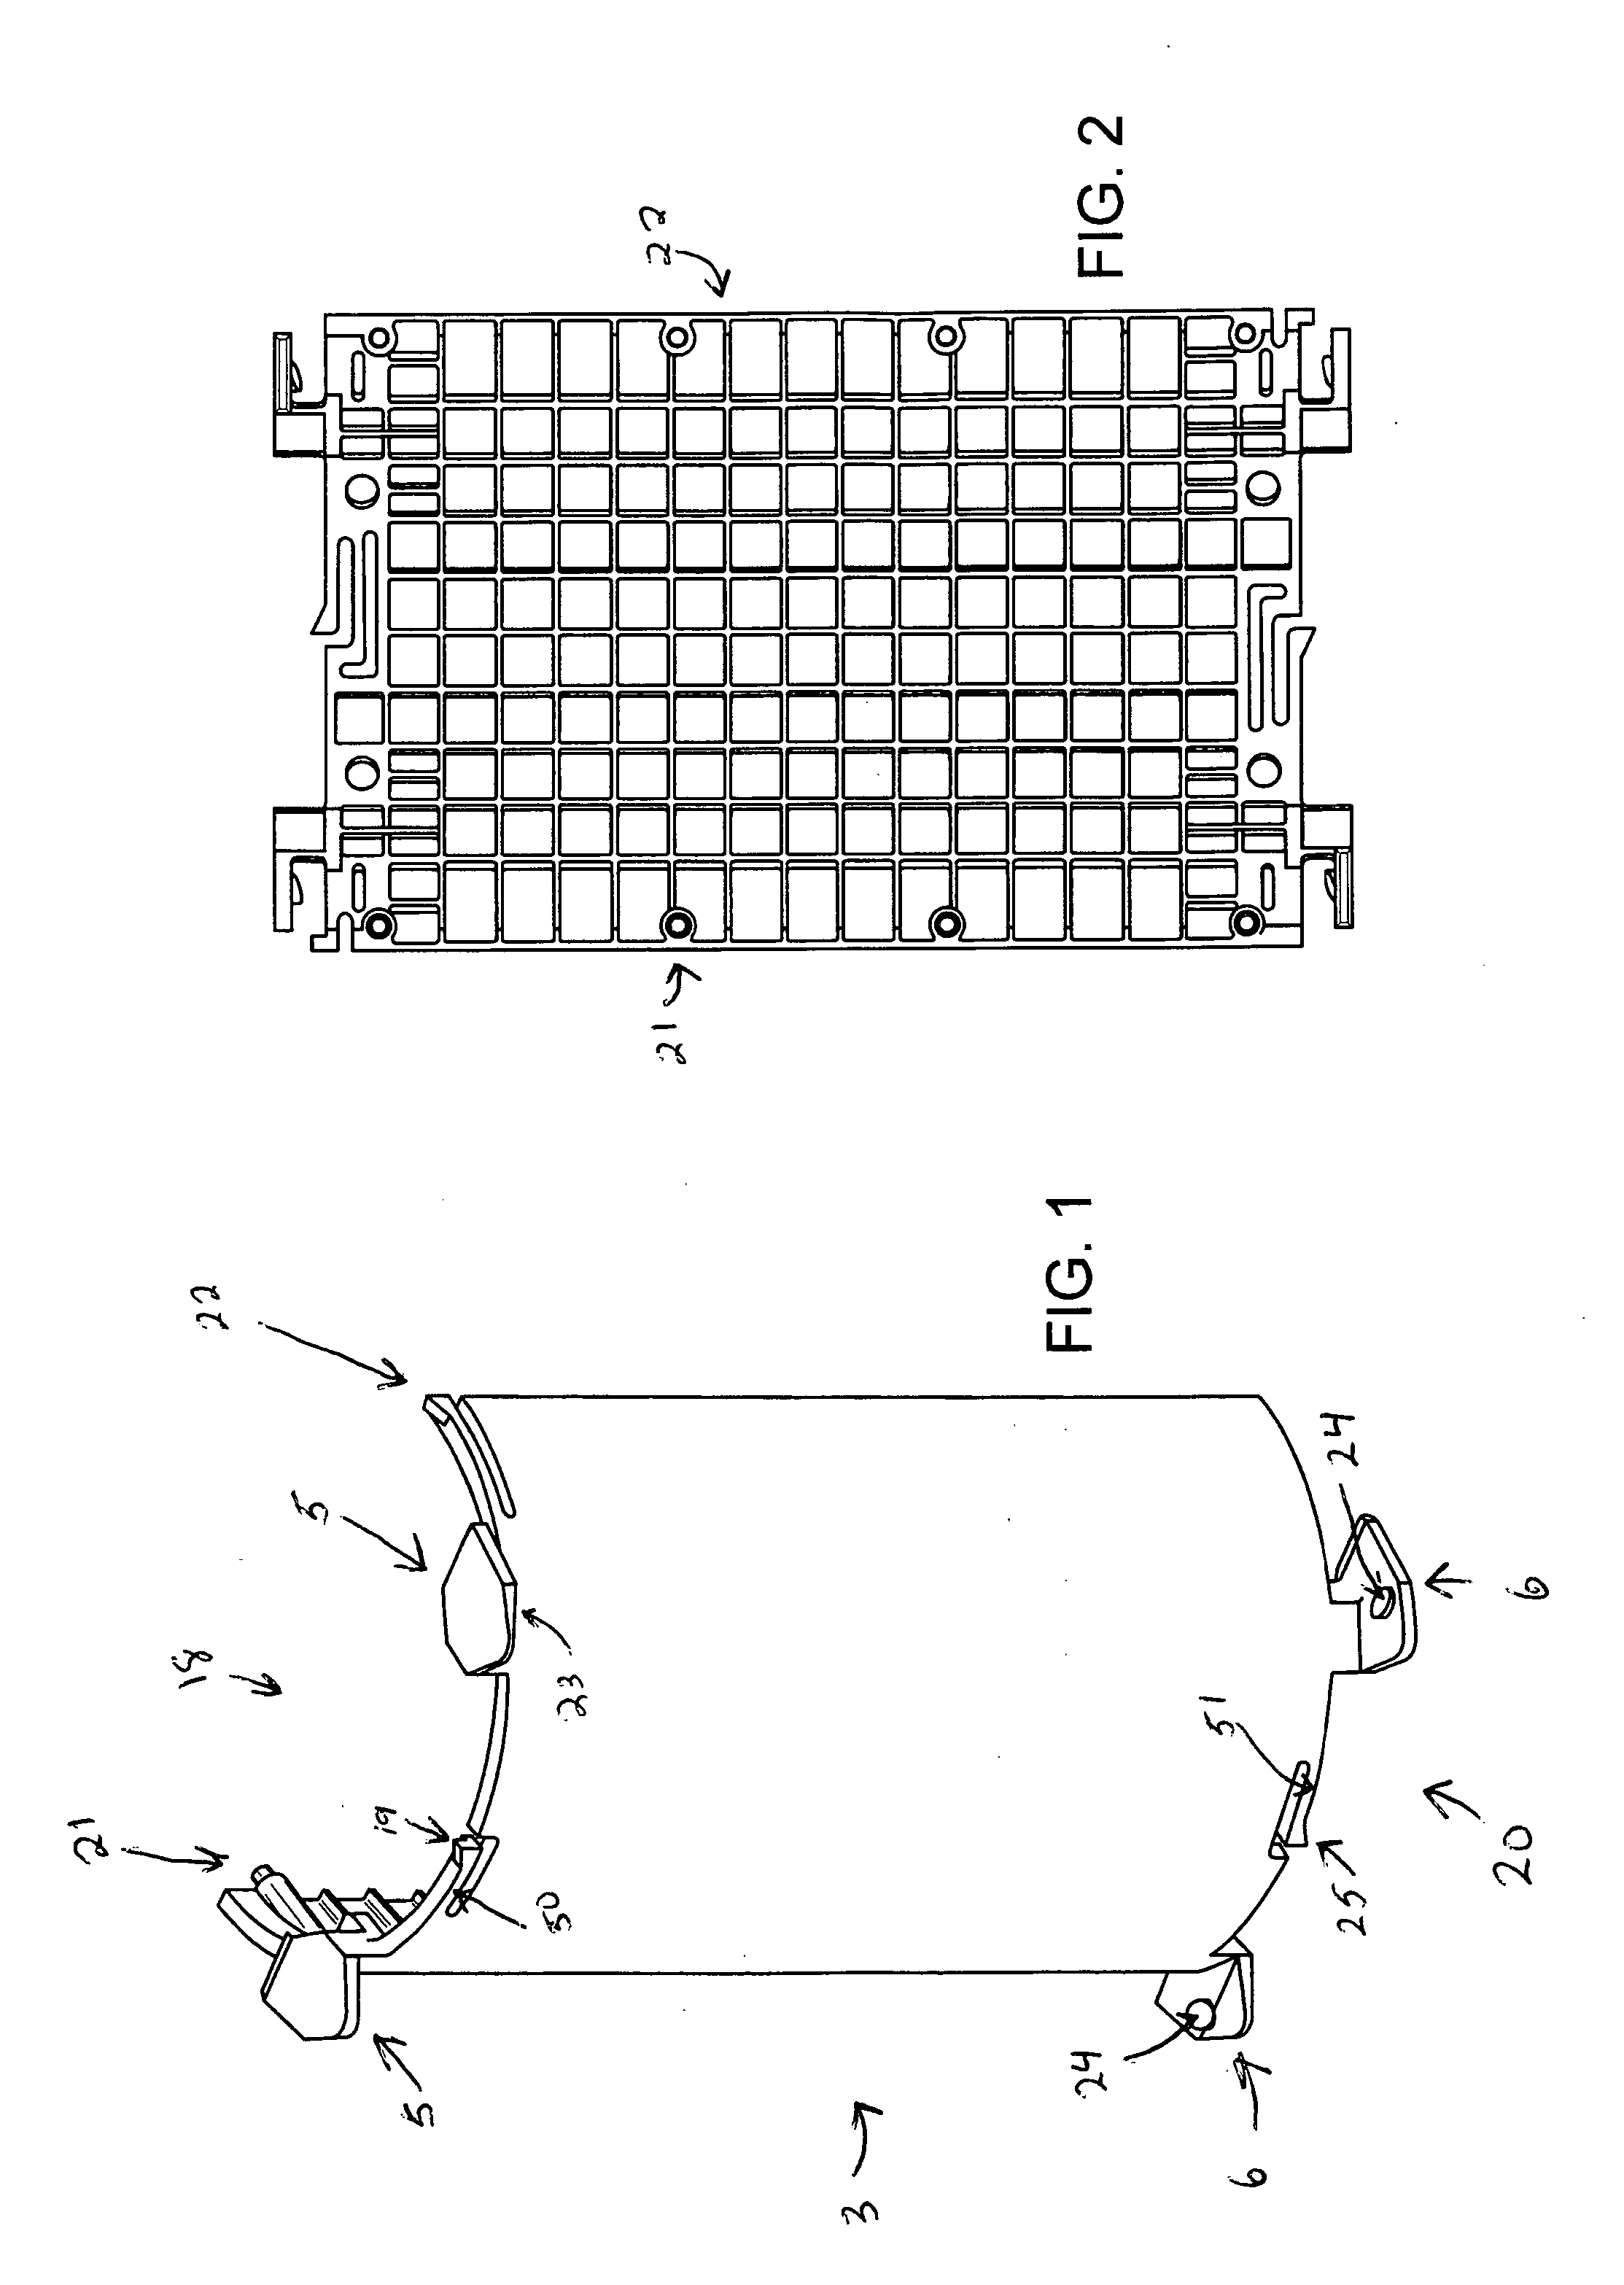 Flexible material storage device